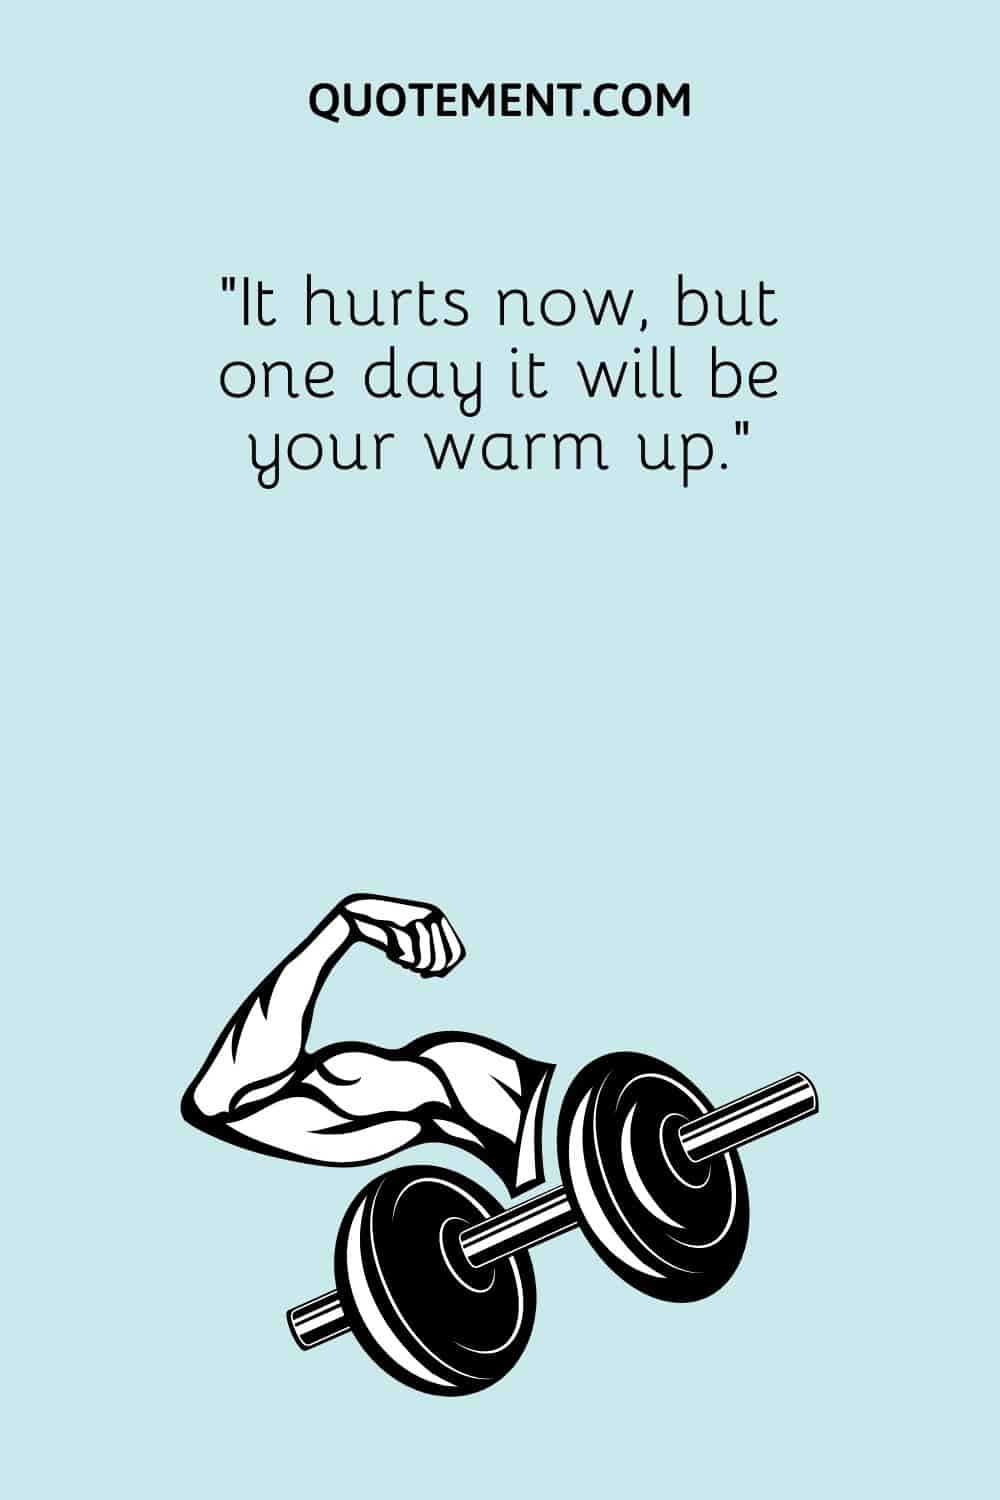 “It hurts now, but one day it will be your warm up.”